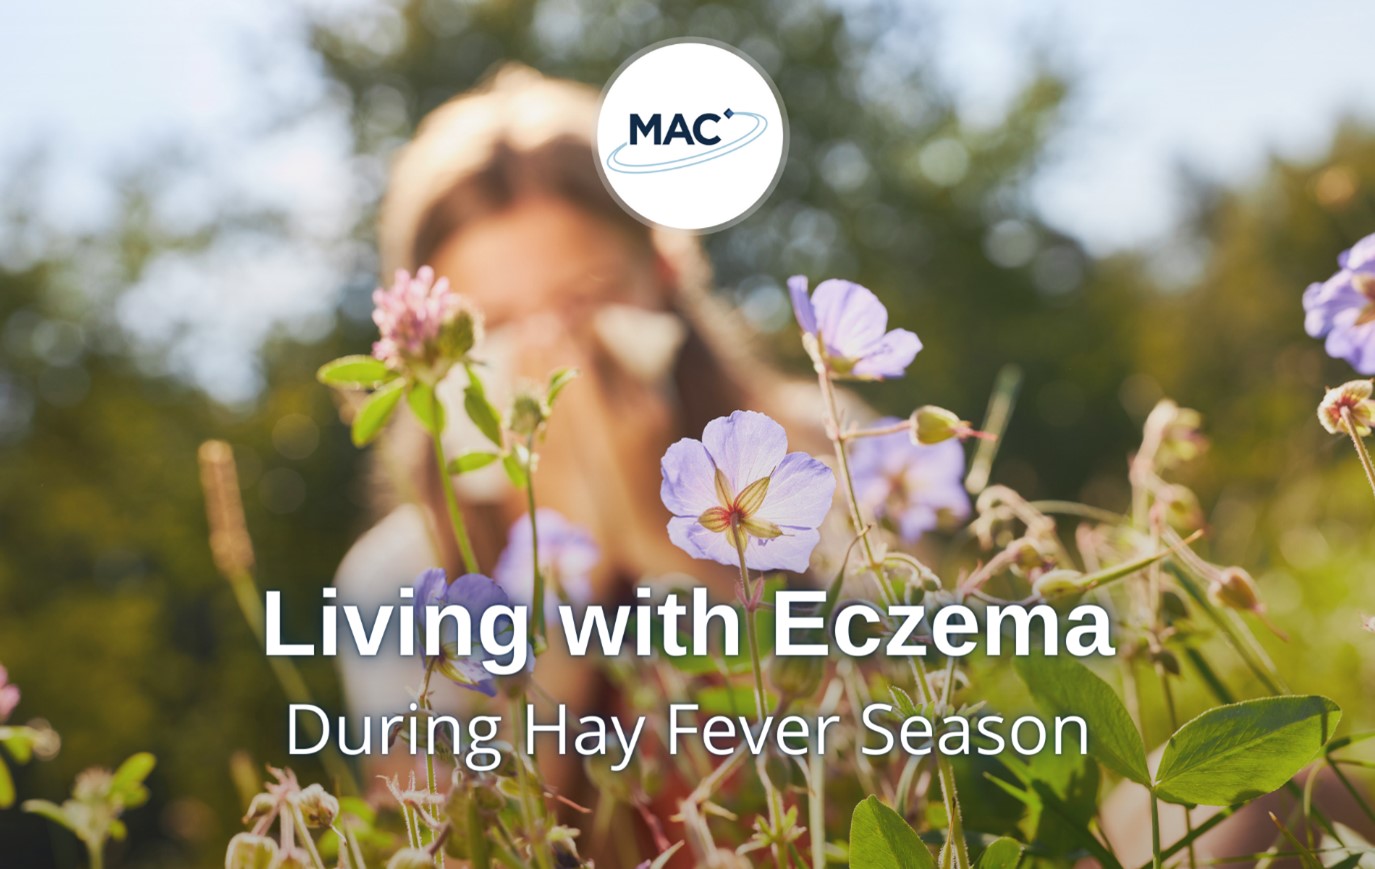 Living with eczema during hay fever season